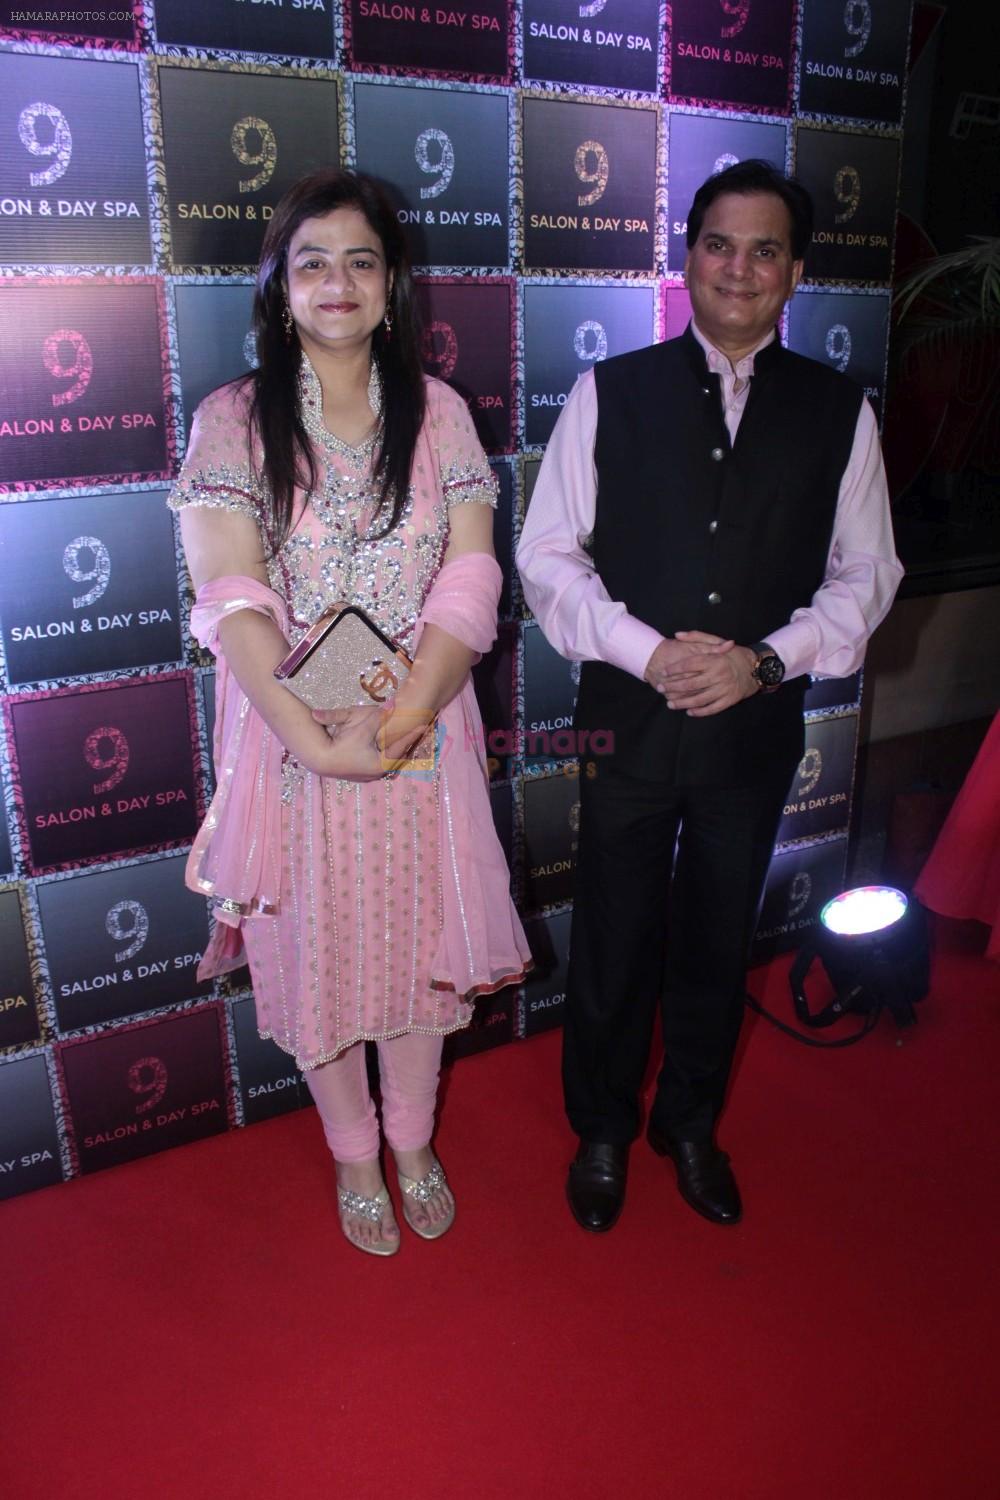 Lalit Pandit at the launch of 9 Salon & Day Spa on 22nd April 2017